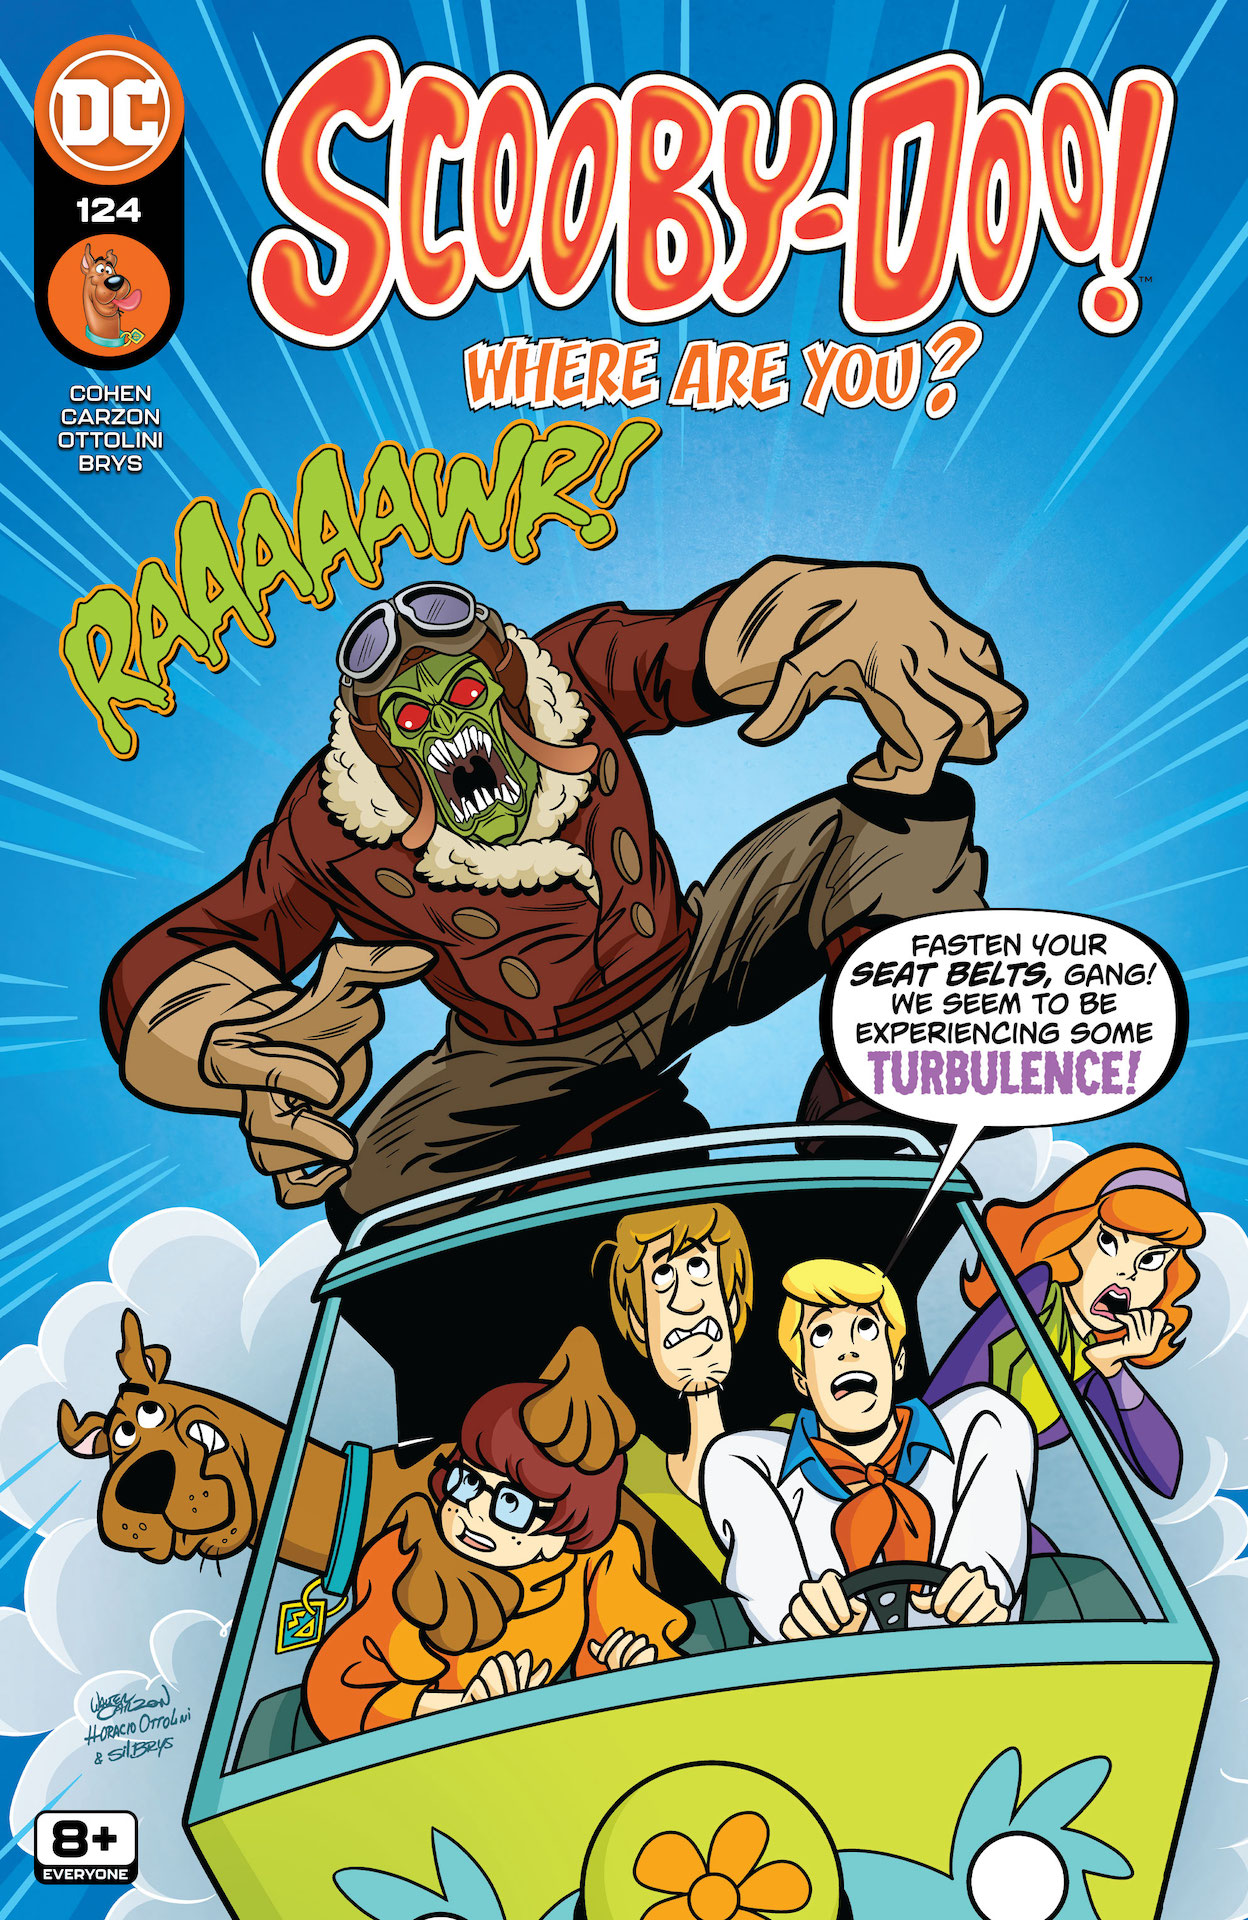 DC Preview: Scooby-Doo, Where Are You? #124